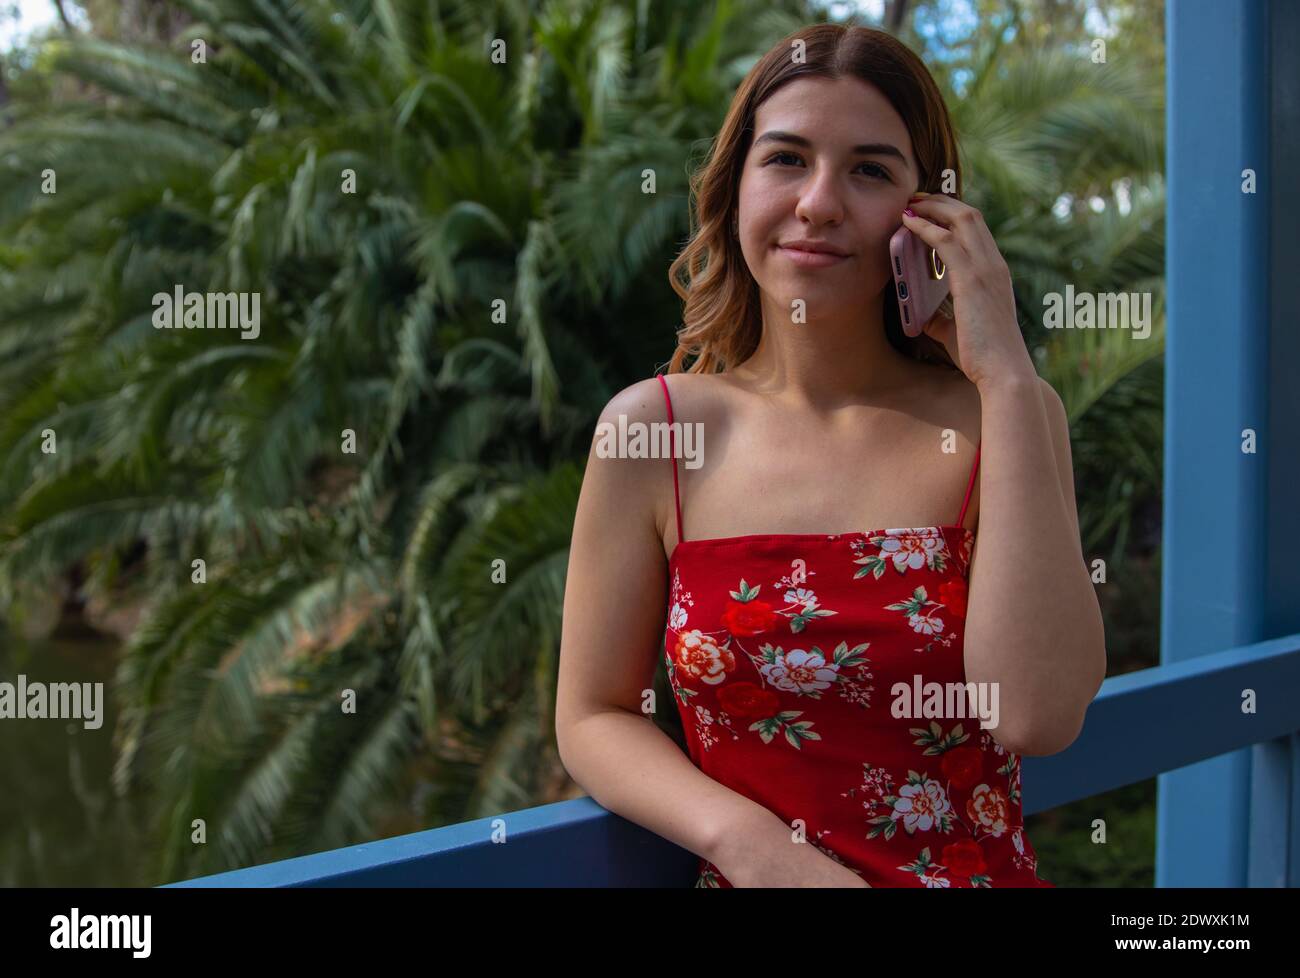 Beautiful young woman wears a red dress. She is talking on the phone in the park Stock Photo